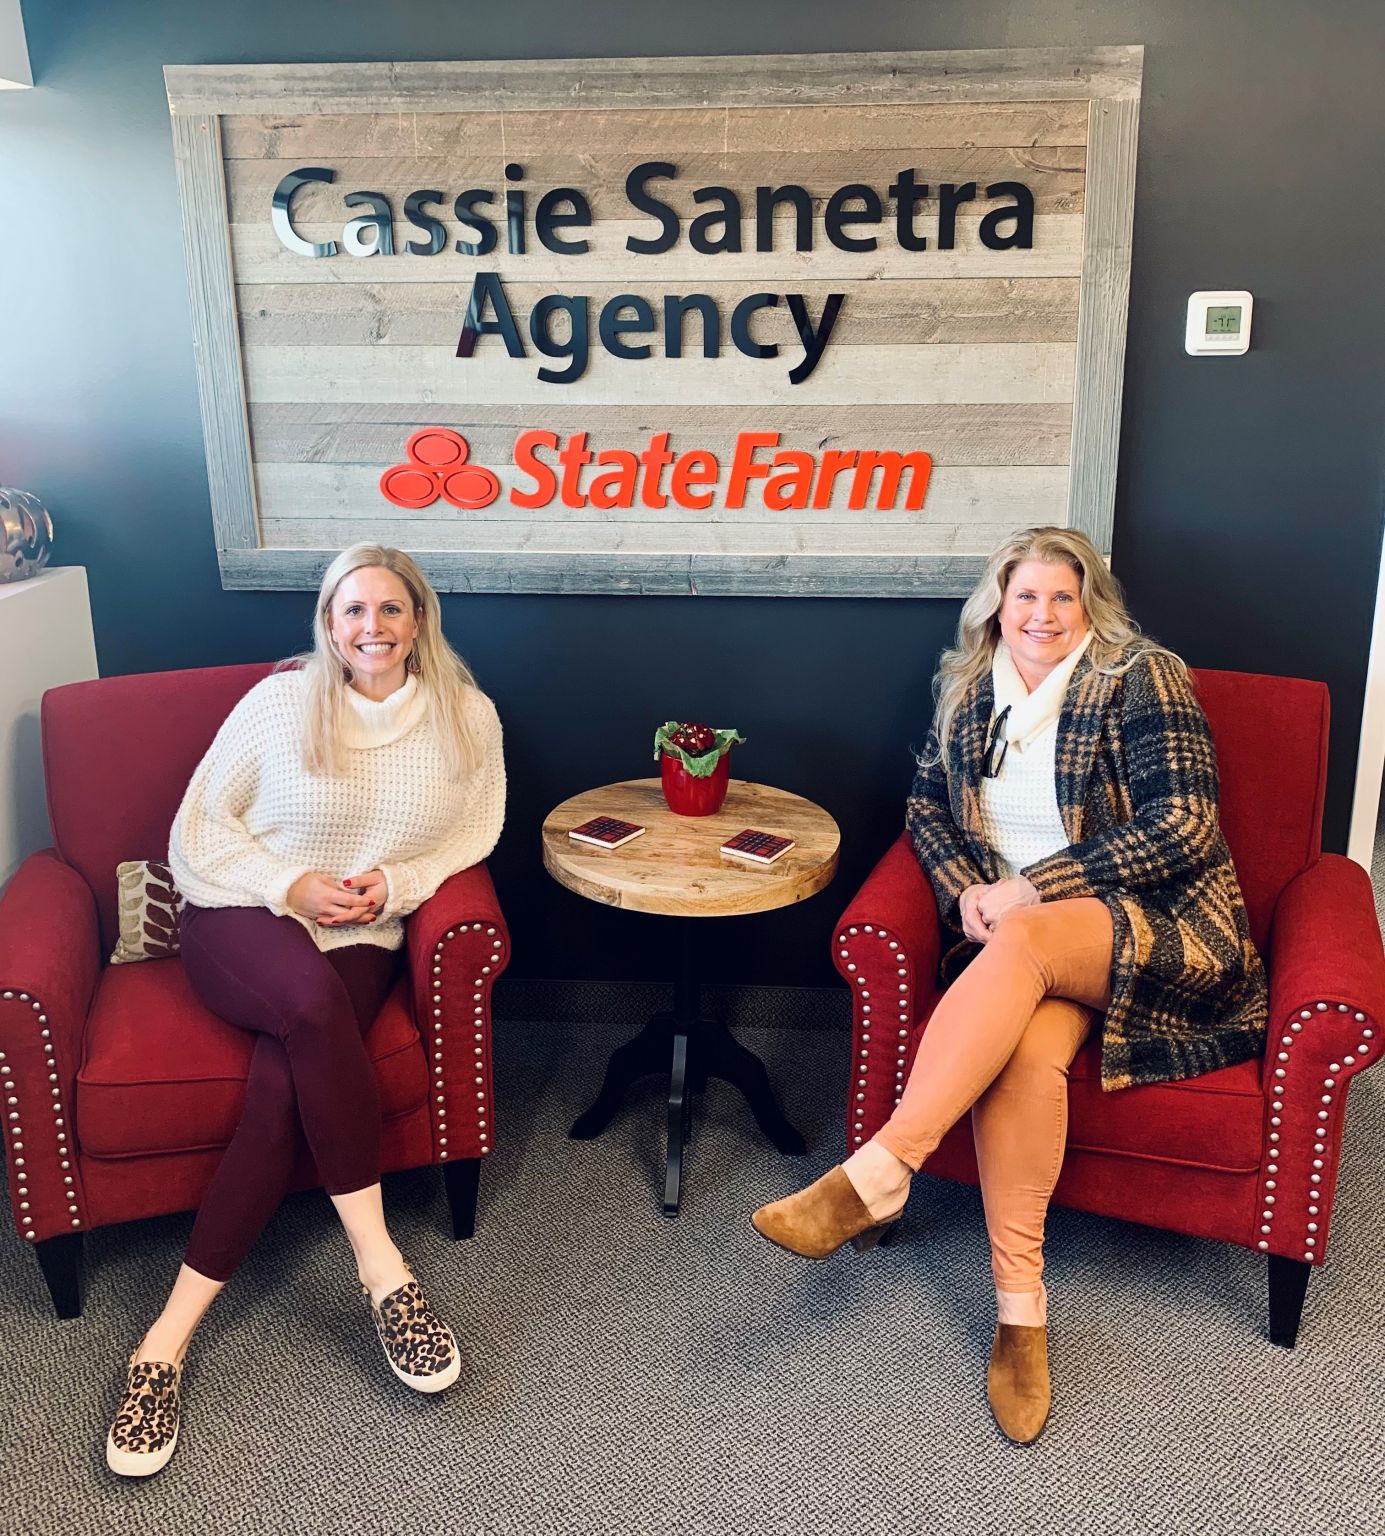 After running a nursing home, Kim Nybo wanted to continue in a career that could help people, and make a difference in a meaningful way. When Kim opened her office over 30 years ago, her daughter Cassie Sanetra saw firsthand the impact of the State Farm independent contractor agent opportunity.

"To me, State Farm and the agent opportunity is the best kept secret in the world. Not only do we help make a difference in peoples' lives but in our team's lives as well. It's a family affair — my husband and brother-in-law are also agents, and now I get to watch my daughter continue in our footsteps, which is the ultimate reward."